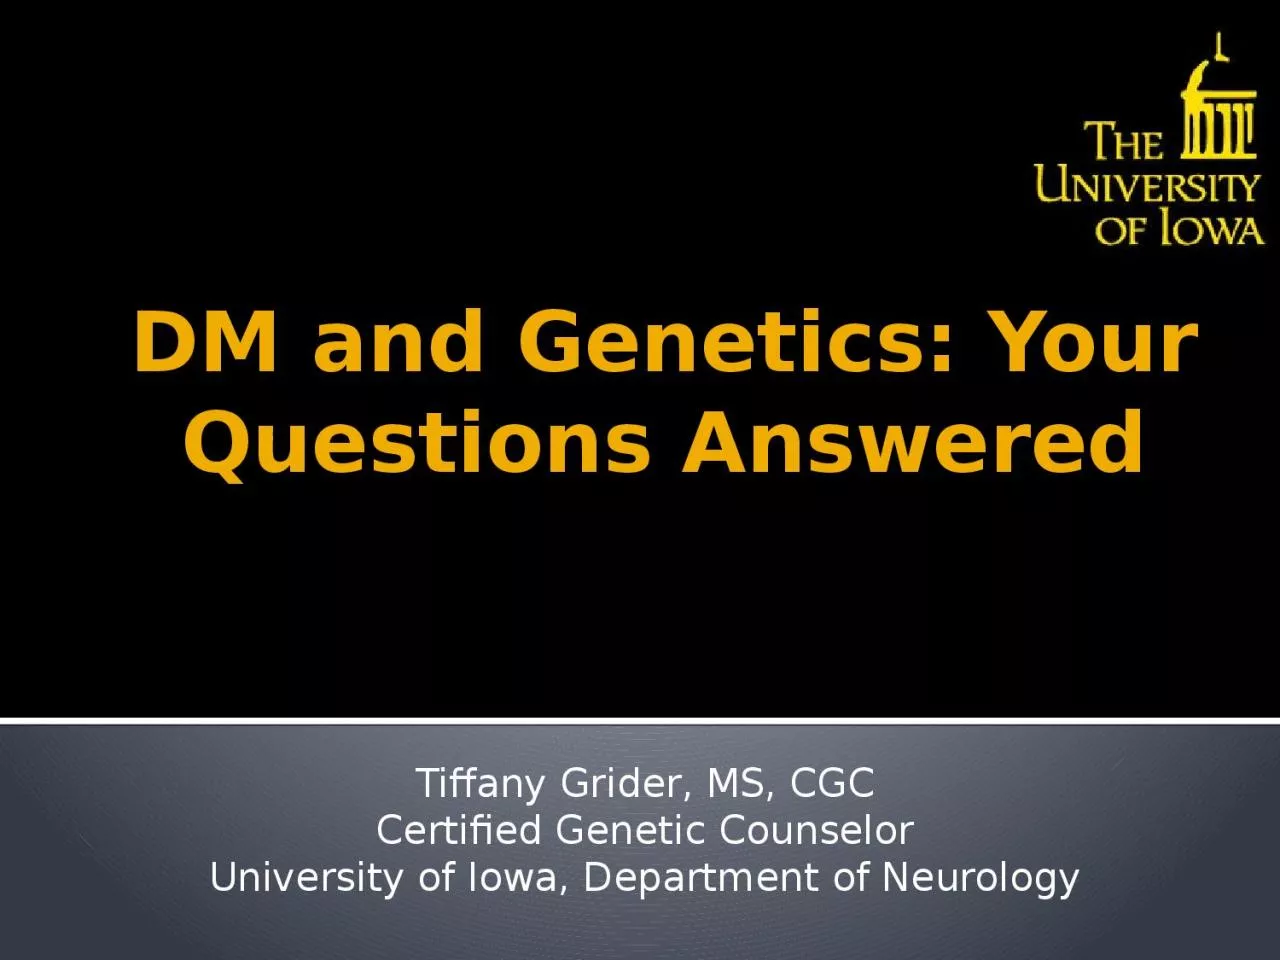 DM and Genetics: Your Questions Answered